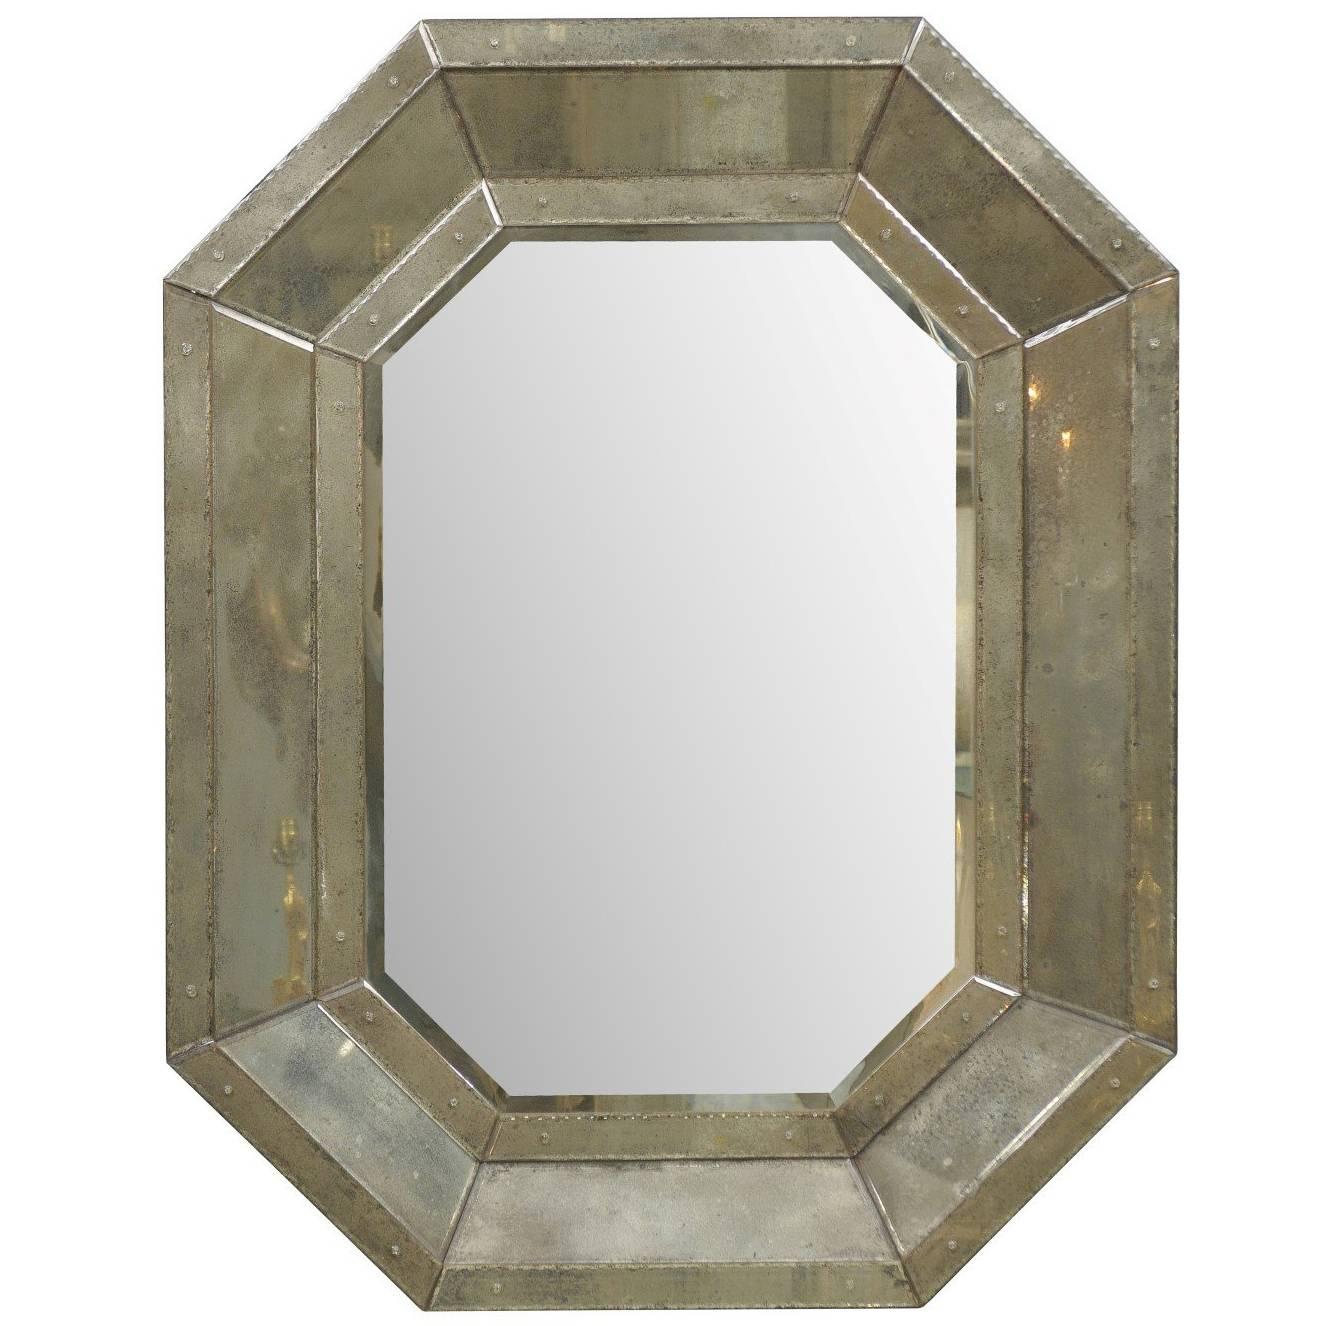 An Octagonal-Shaped Venetian Style Mirror with Beveled Surround